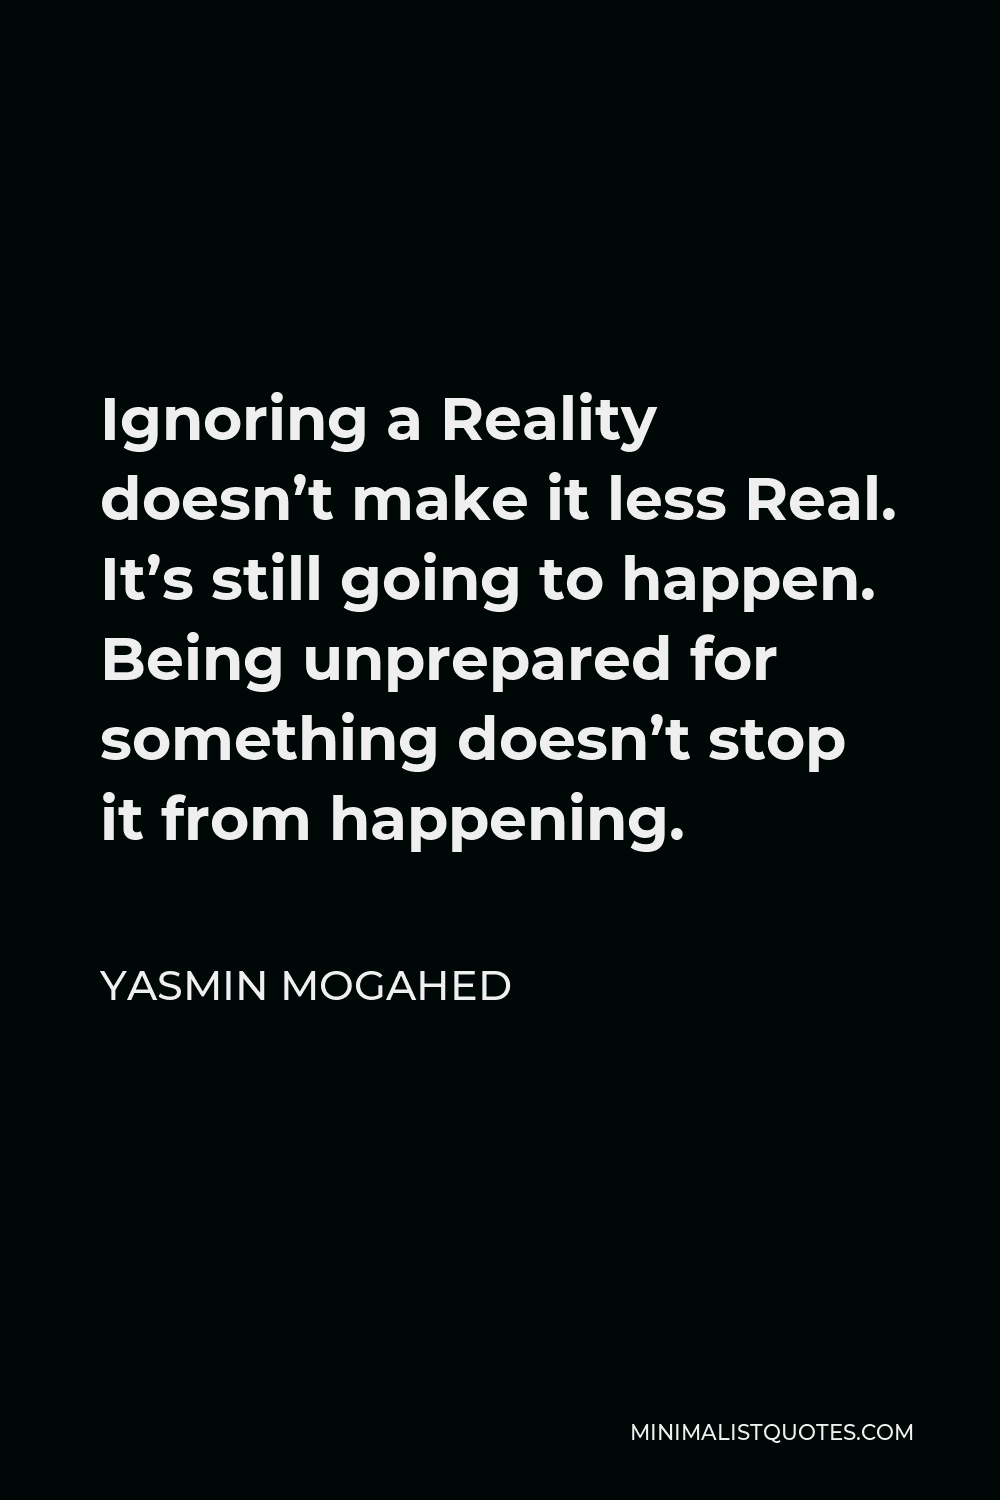 Yasmin Mogahed Quote - Ignoring a Reality doesn’t make it less Real. It’s still going to happen. Being unprepared for something doesn’t stop it from happening.